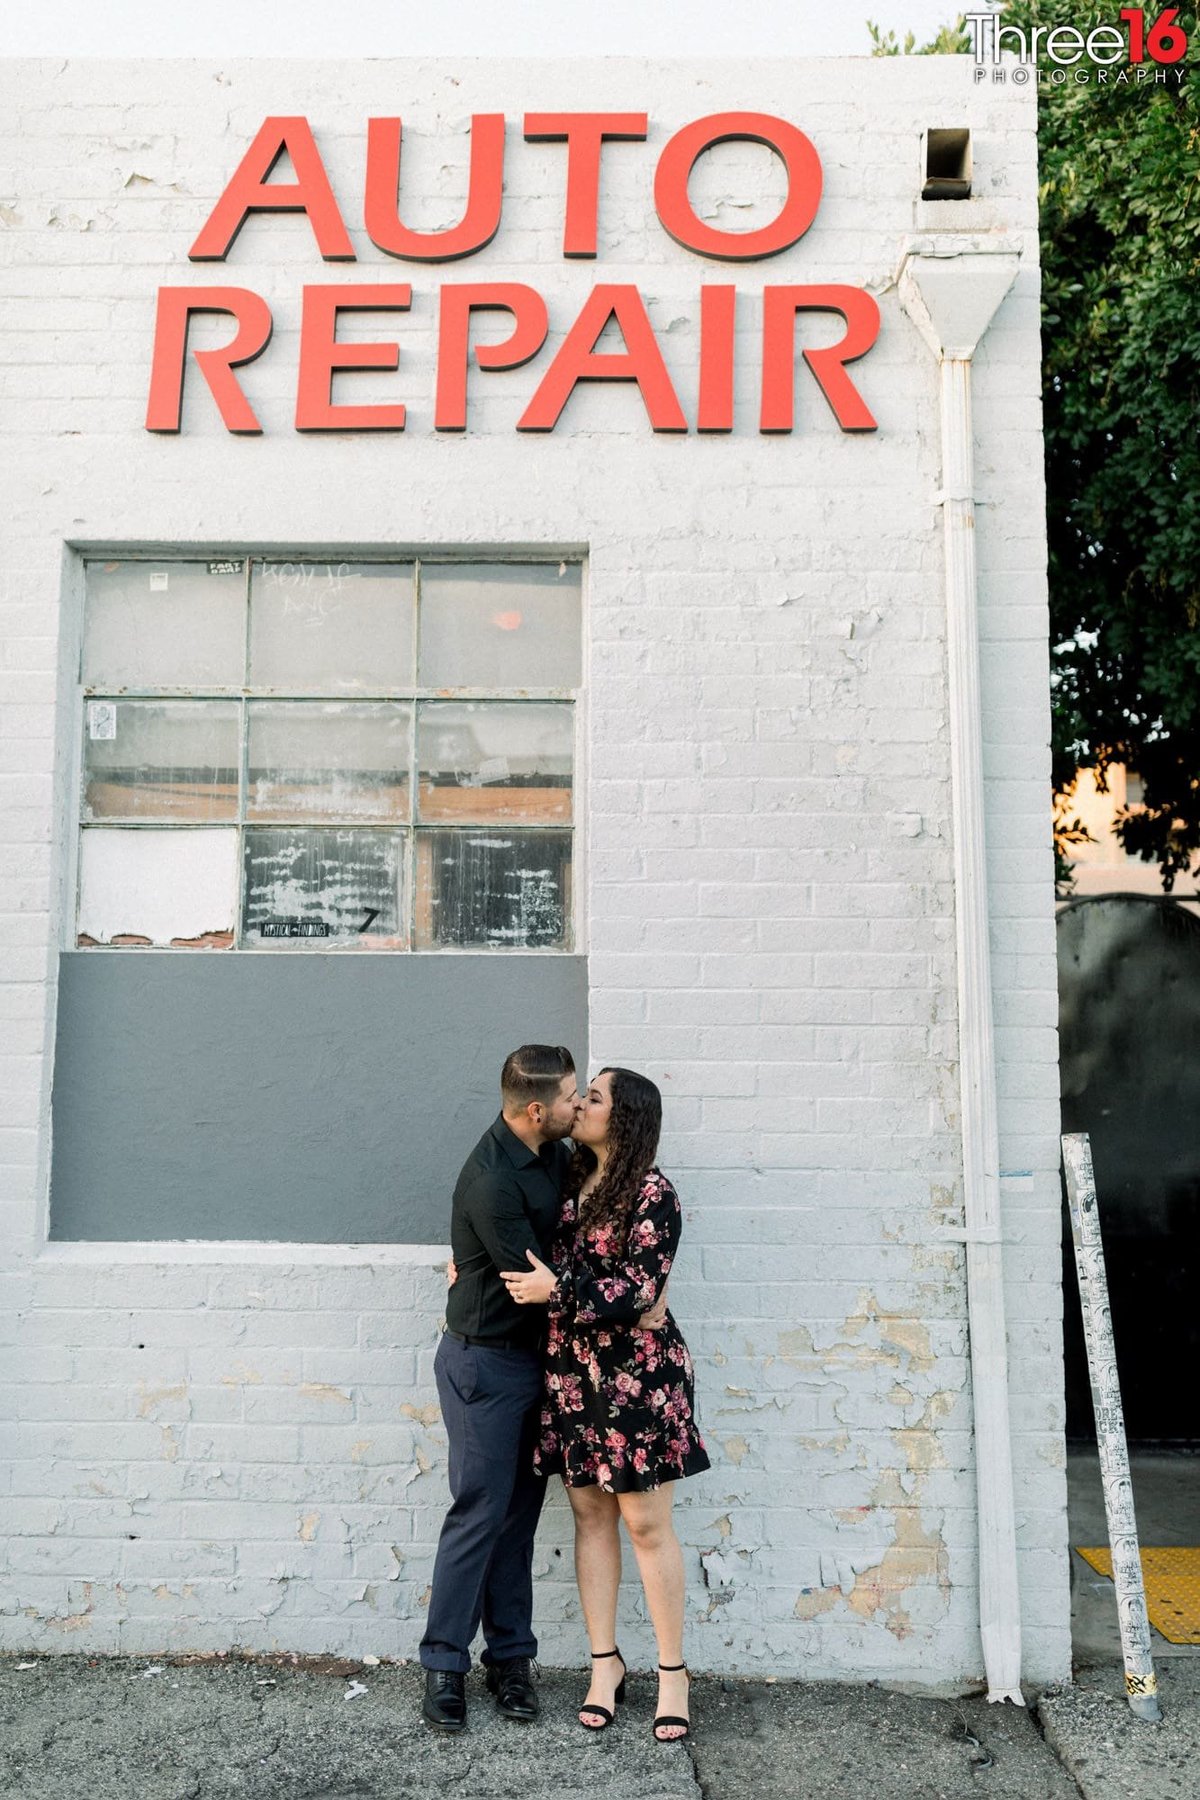 Engaged couple share a kiss under the Auto Repair sign